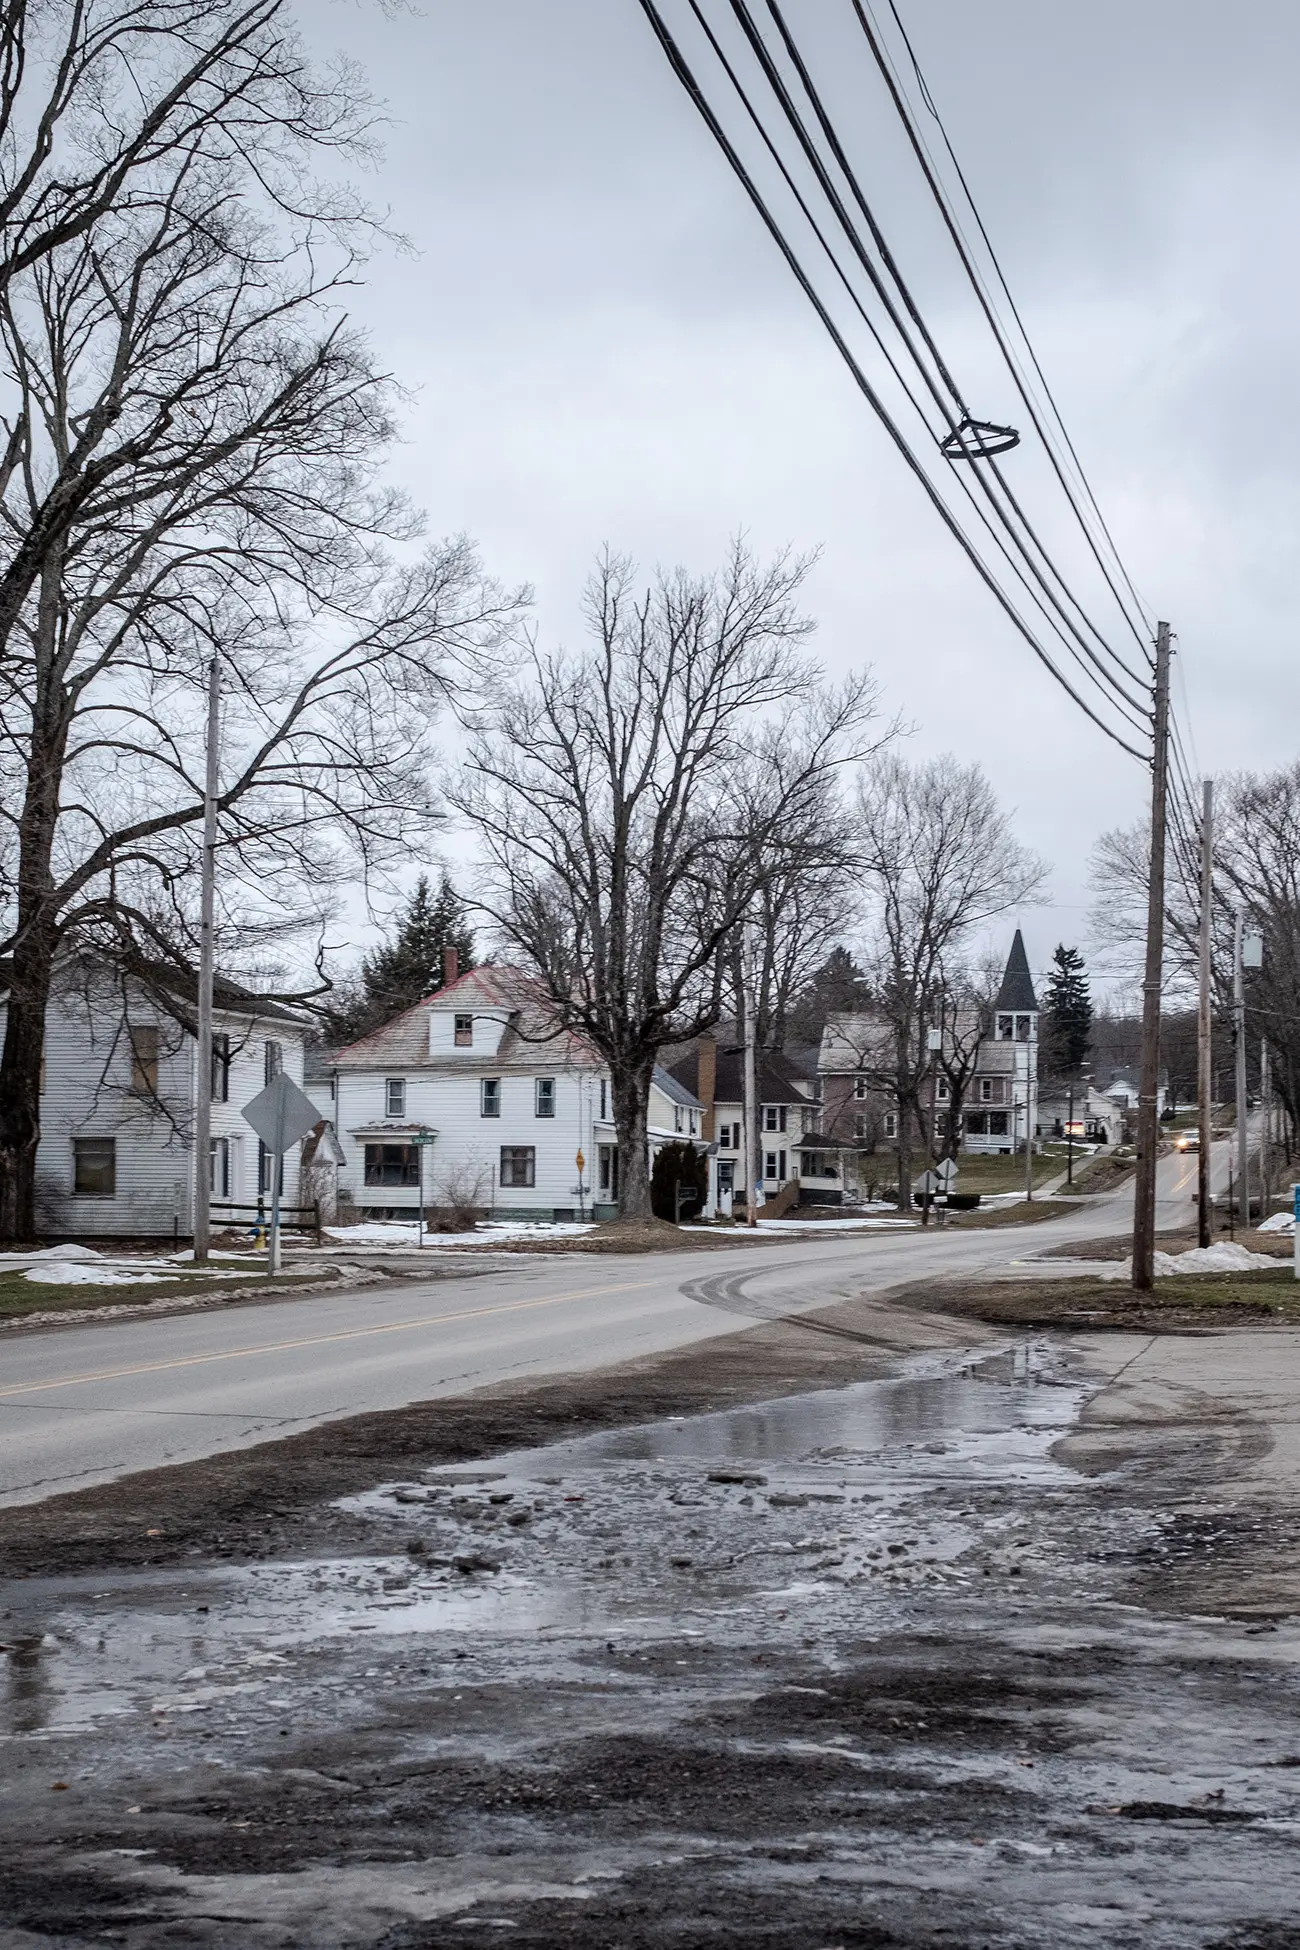 Photo of a small town in winter